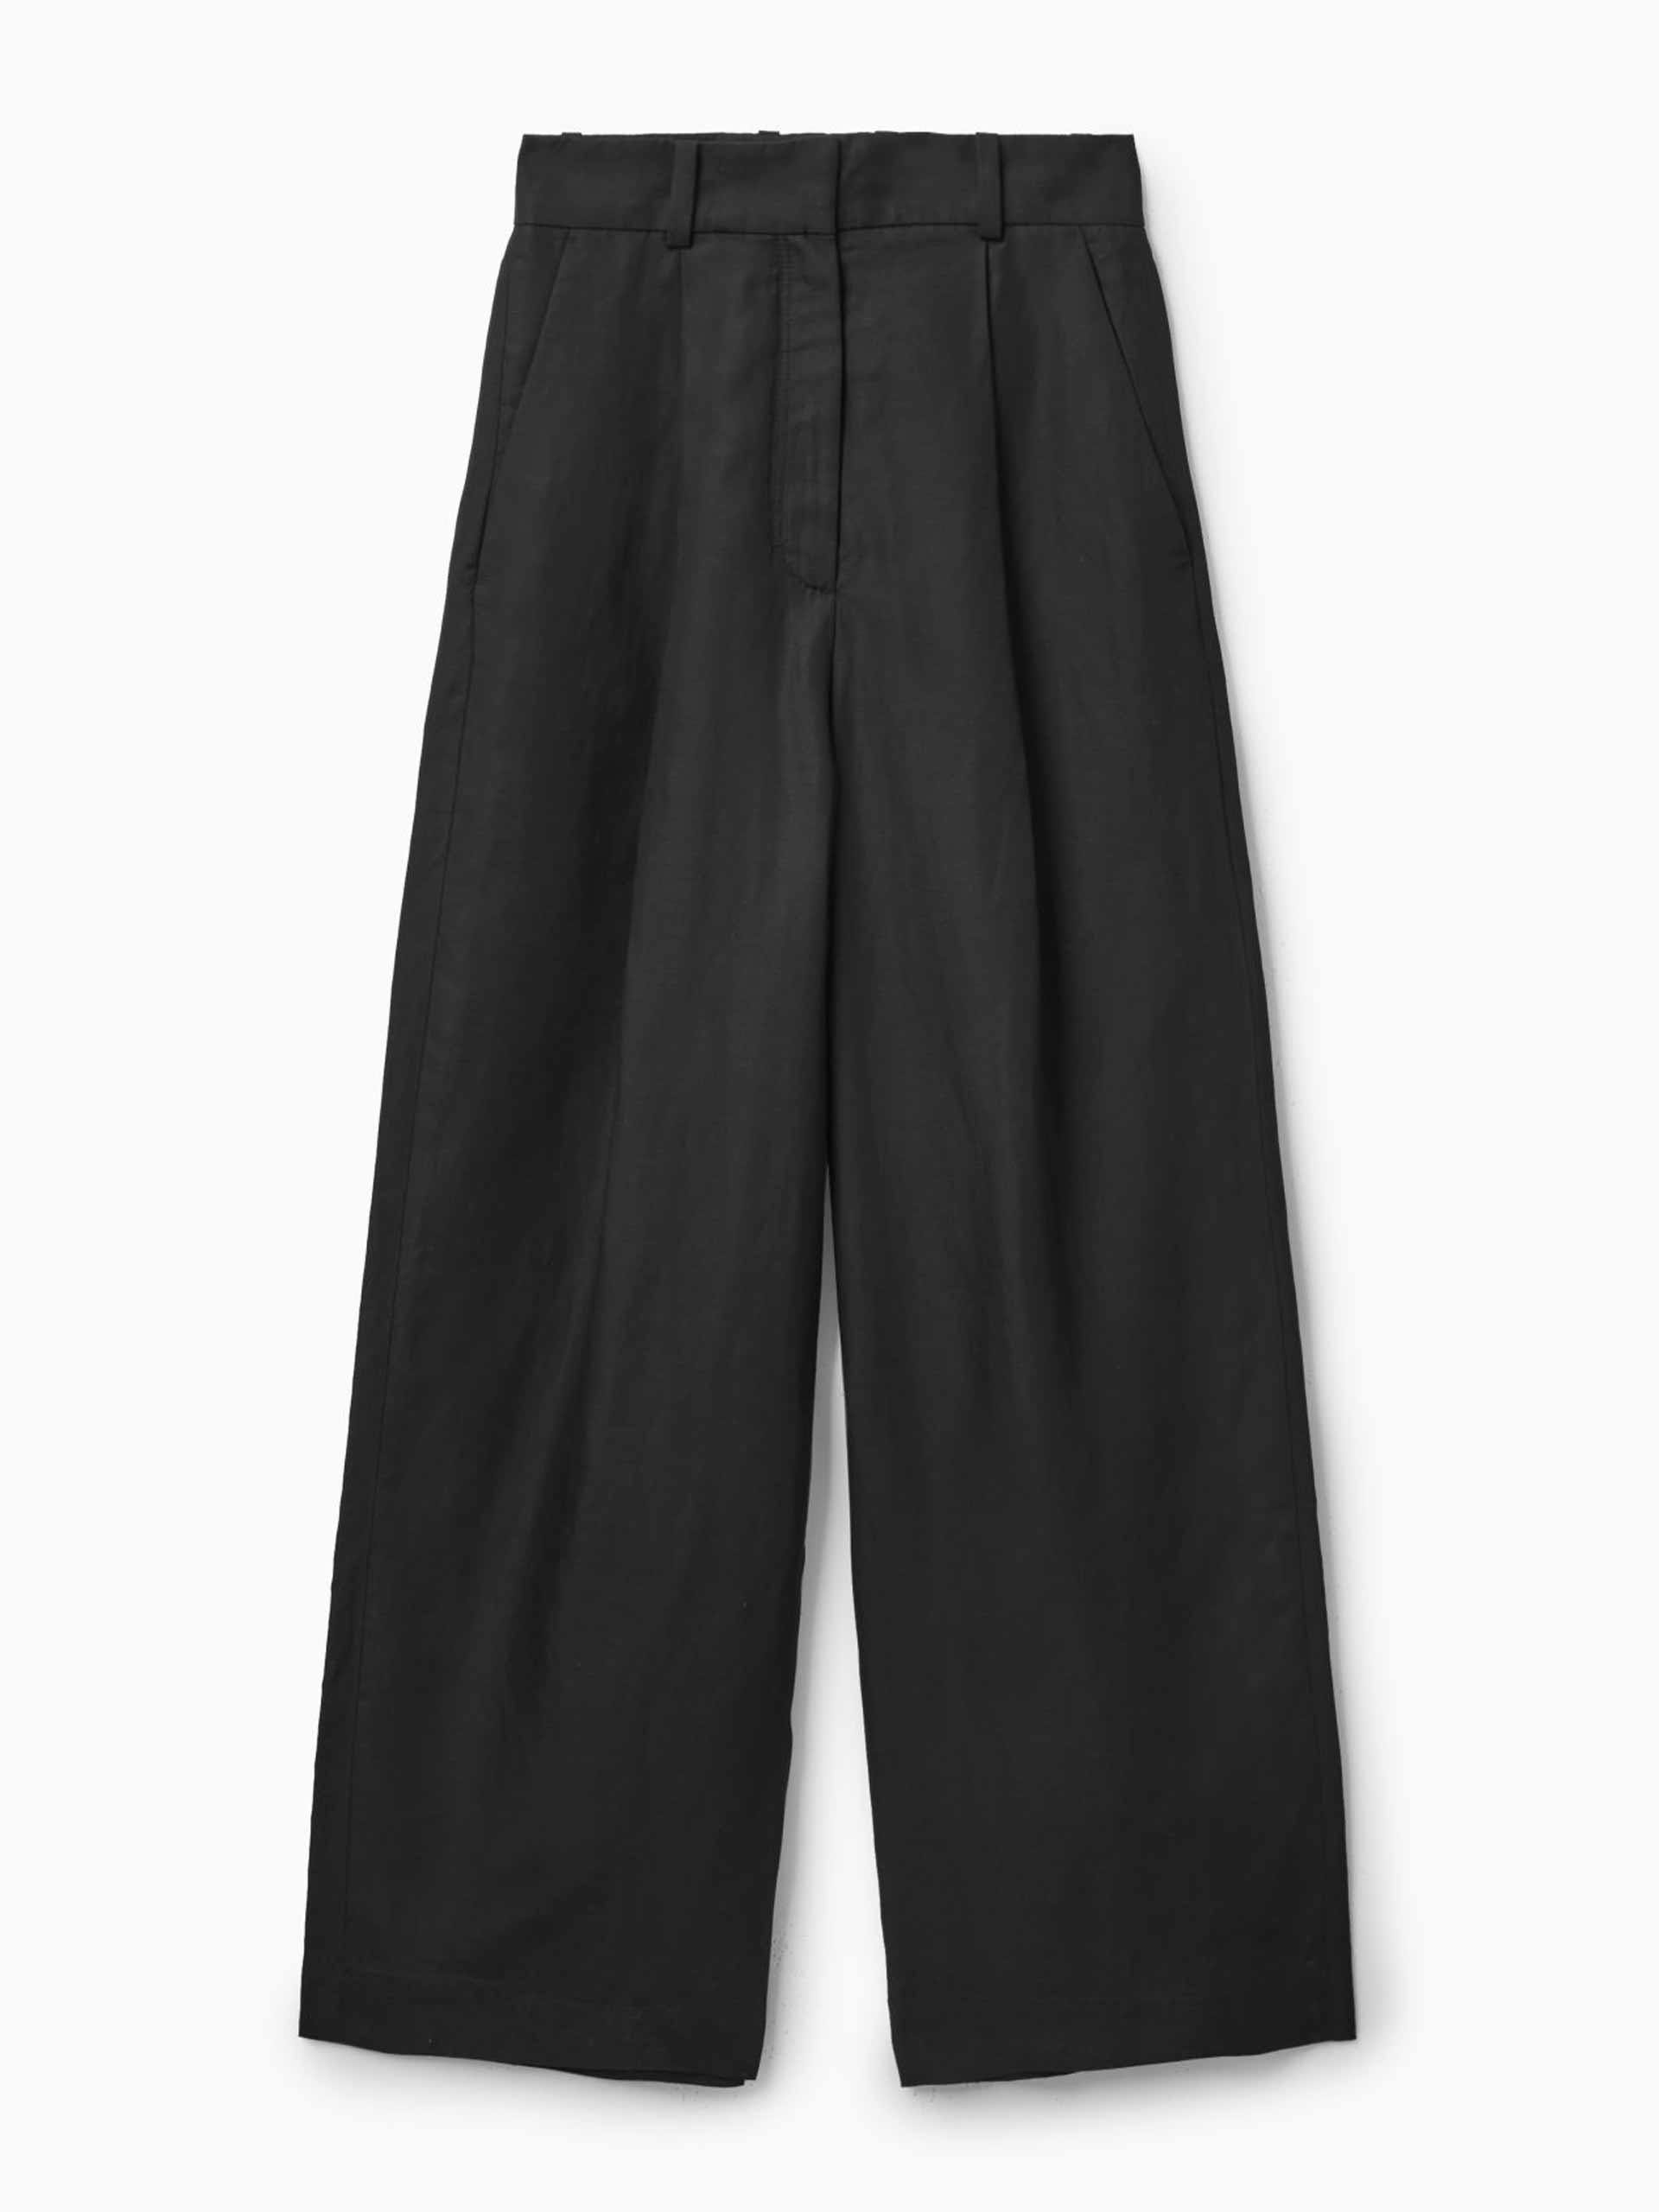 Black high-waisted wide-leg trousers